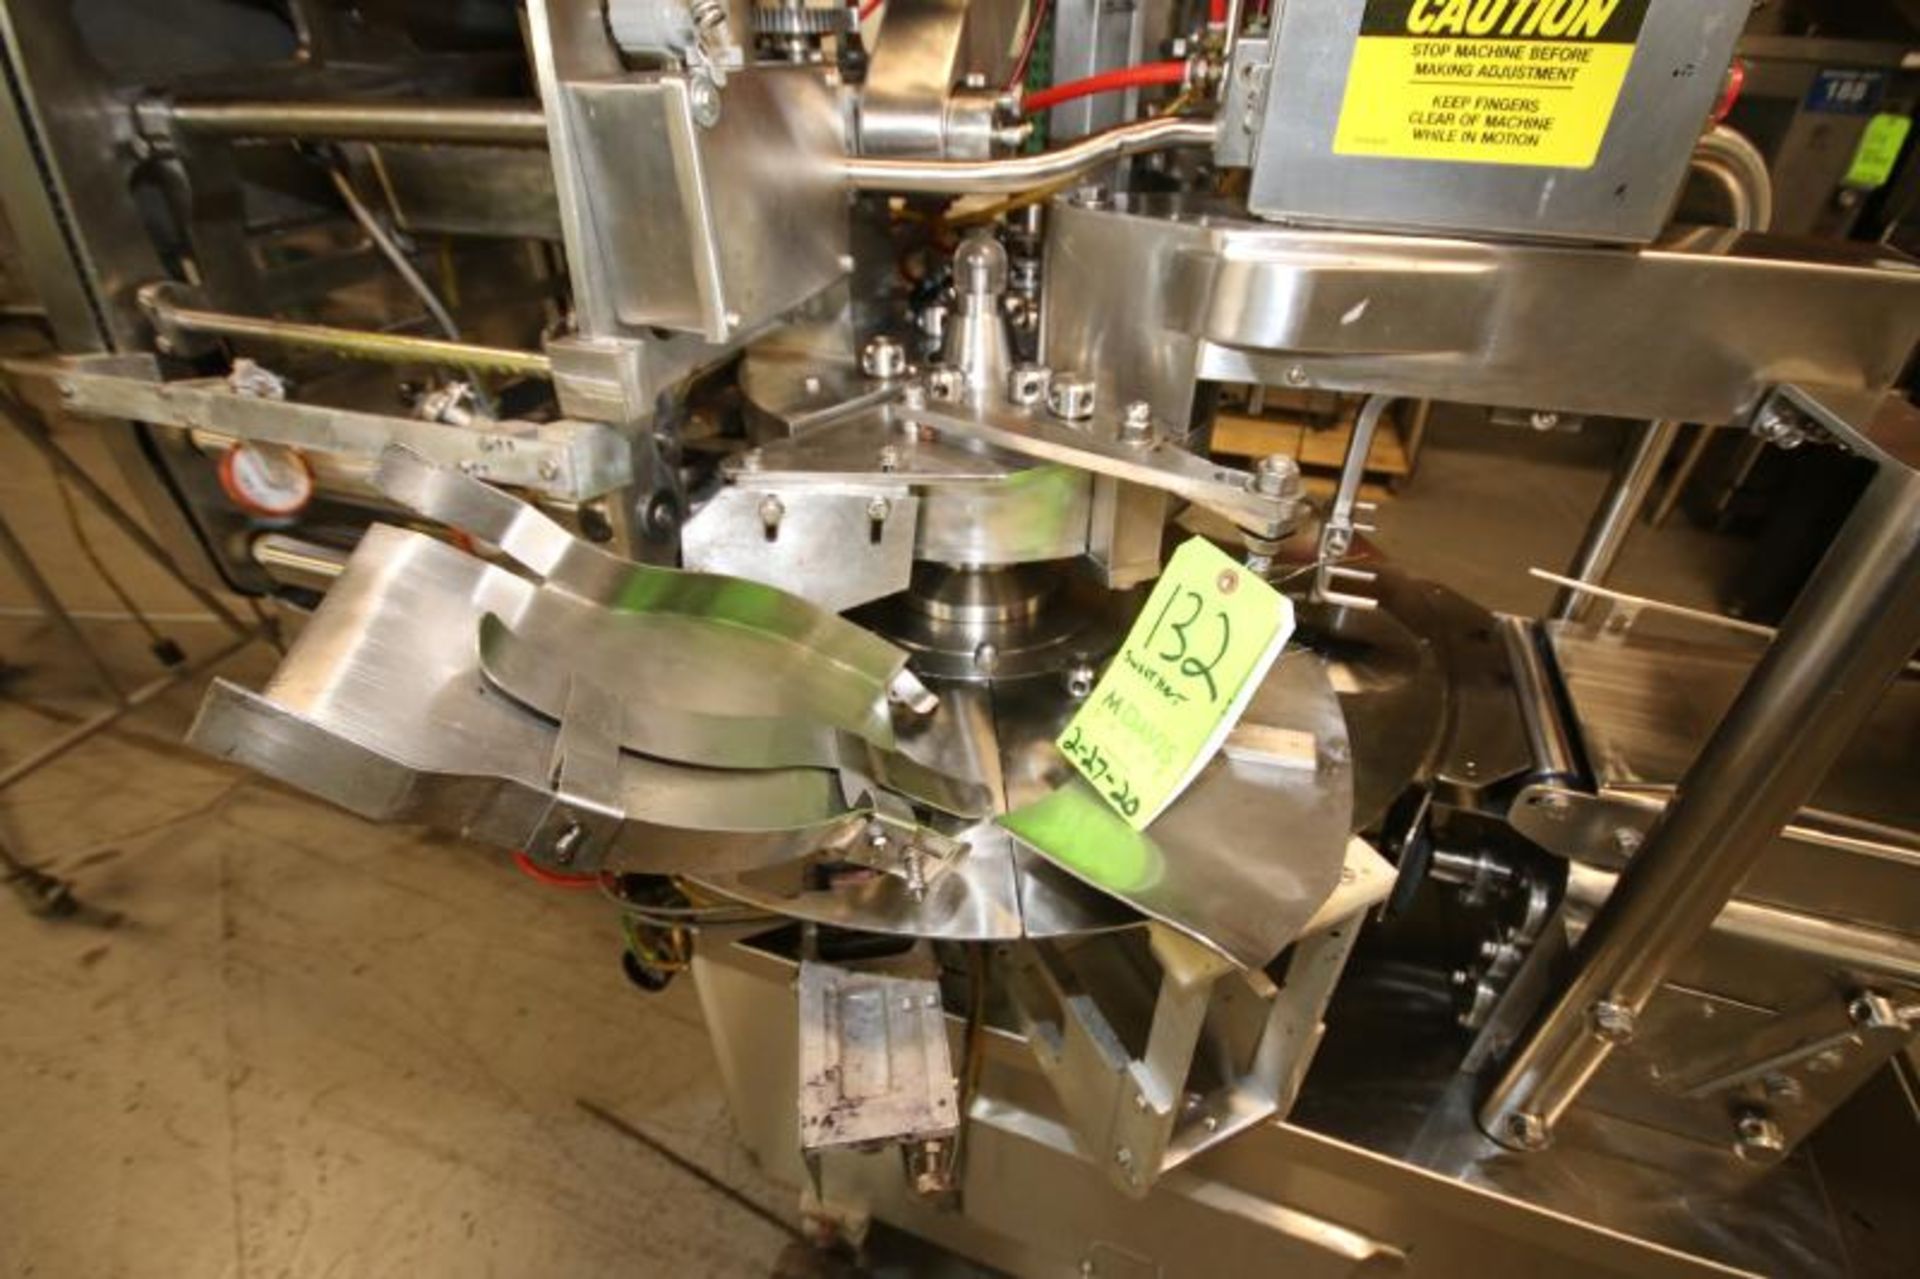 Sweetheart Cup. Co. / Flexefill 8 - Station Rotary S/S Cup Sealer, SN 23-02, Set - Up with 5.5" - Image 2 of 9